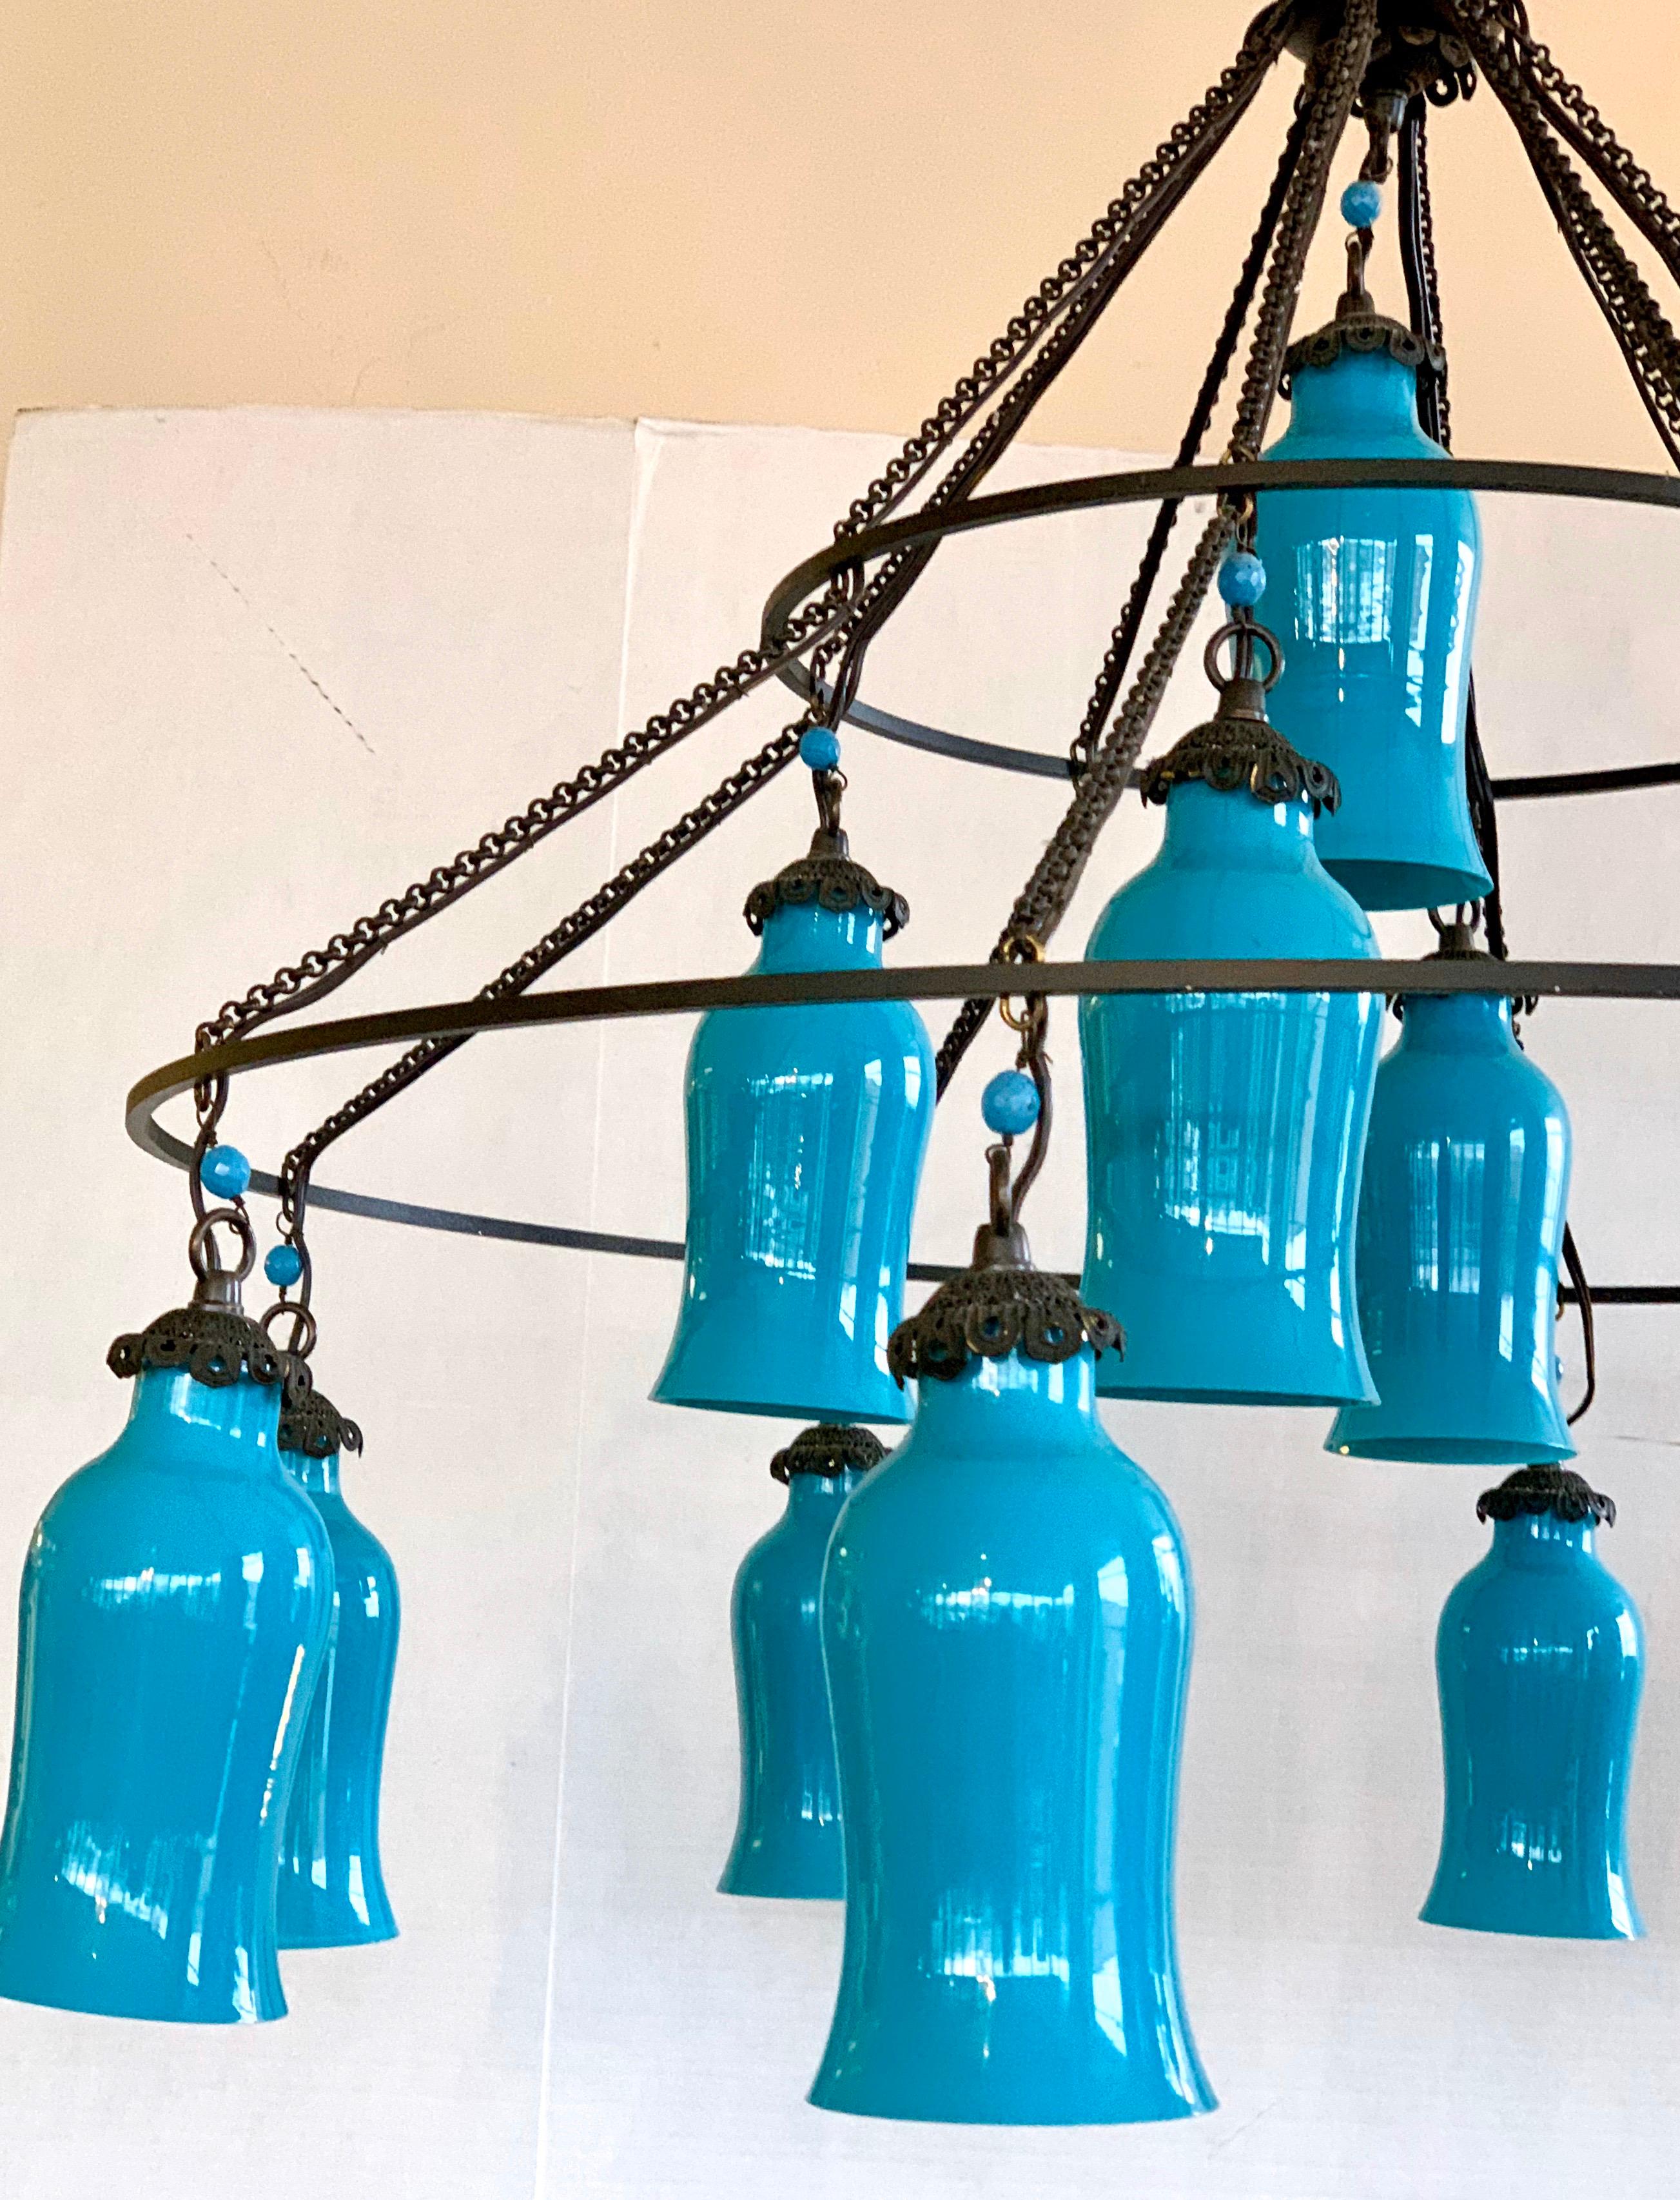 Unusual twelve light chandelier with black wrought iron like frame and turquoise milk glass shades by Liza Sherman, NY.  This amazing piece is not only massive in size but it's visual scale and presents is amazing. Custom-made using Egyptian hand